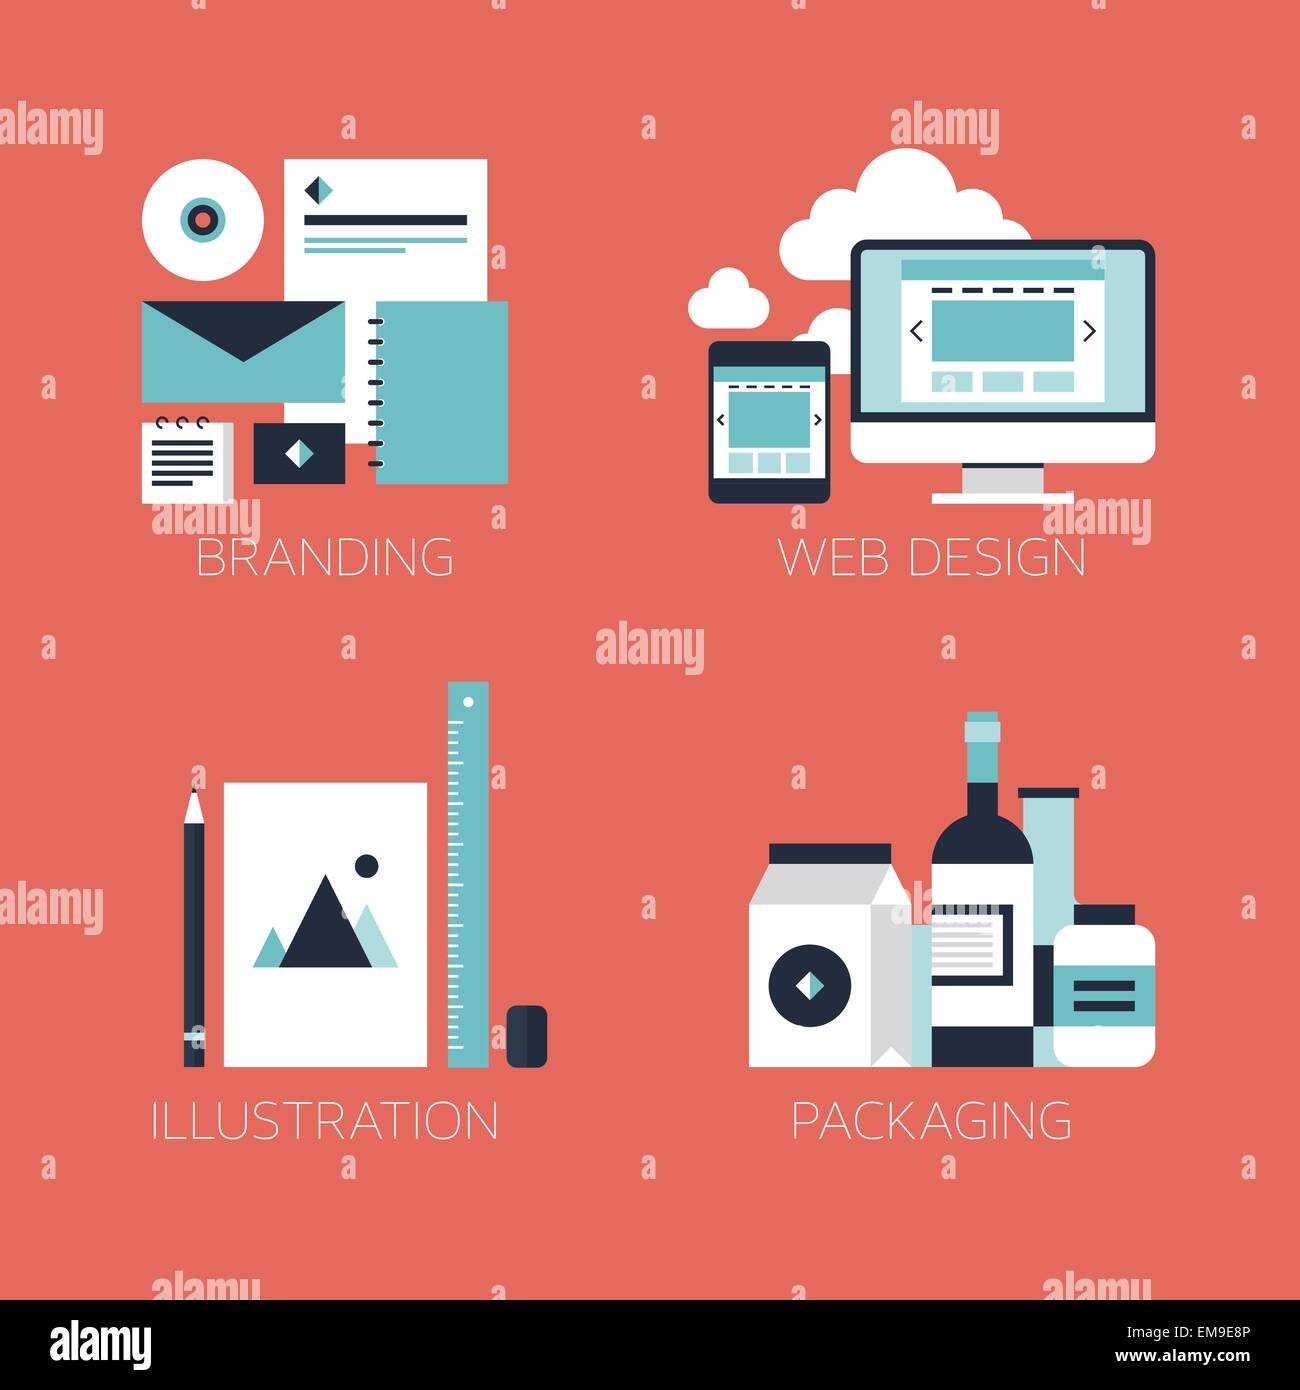 Flat design corporate style icons Stock Vector